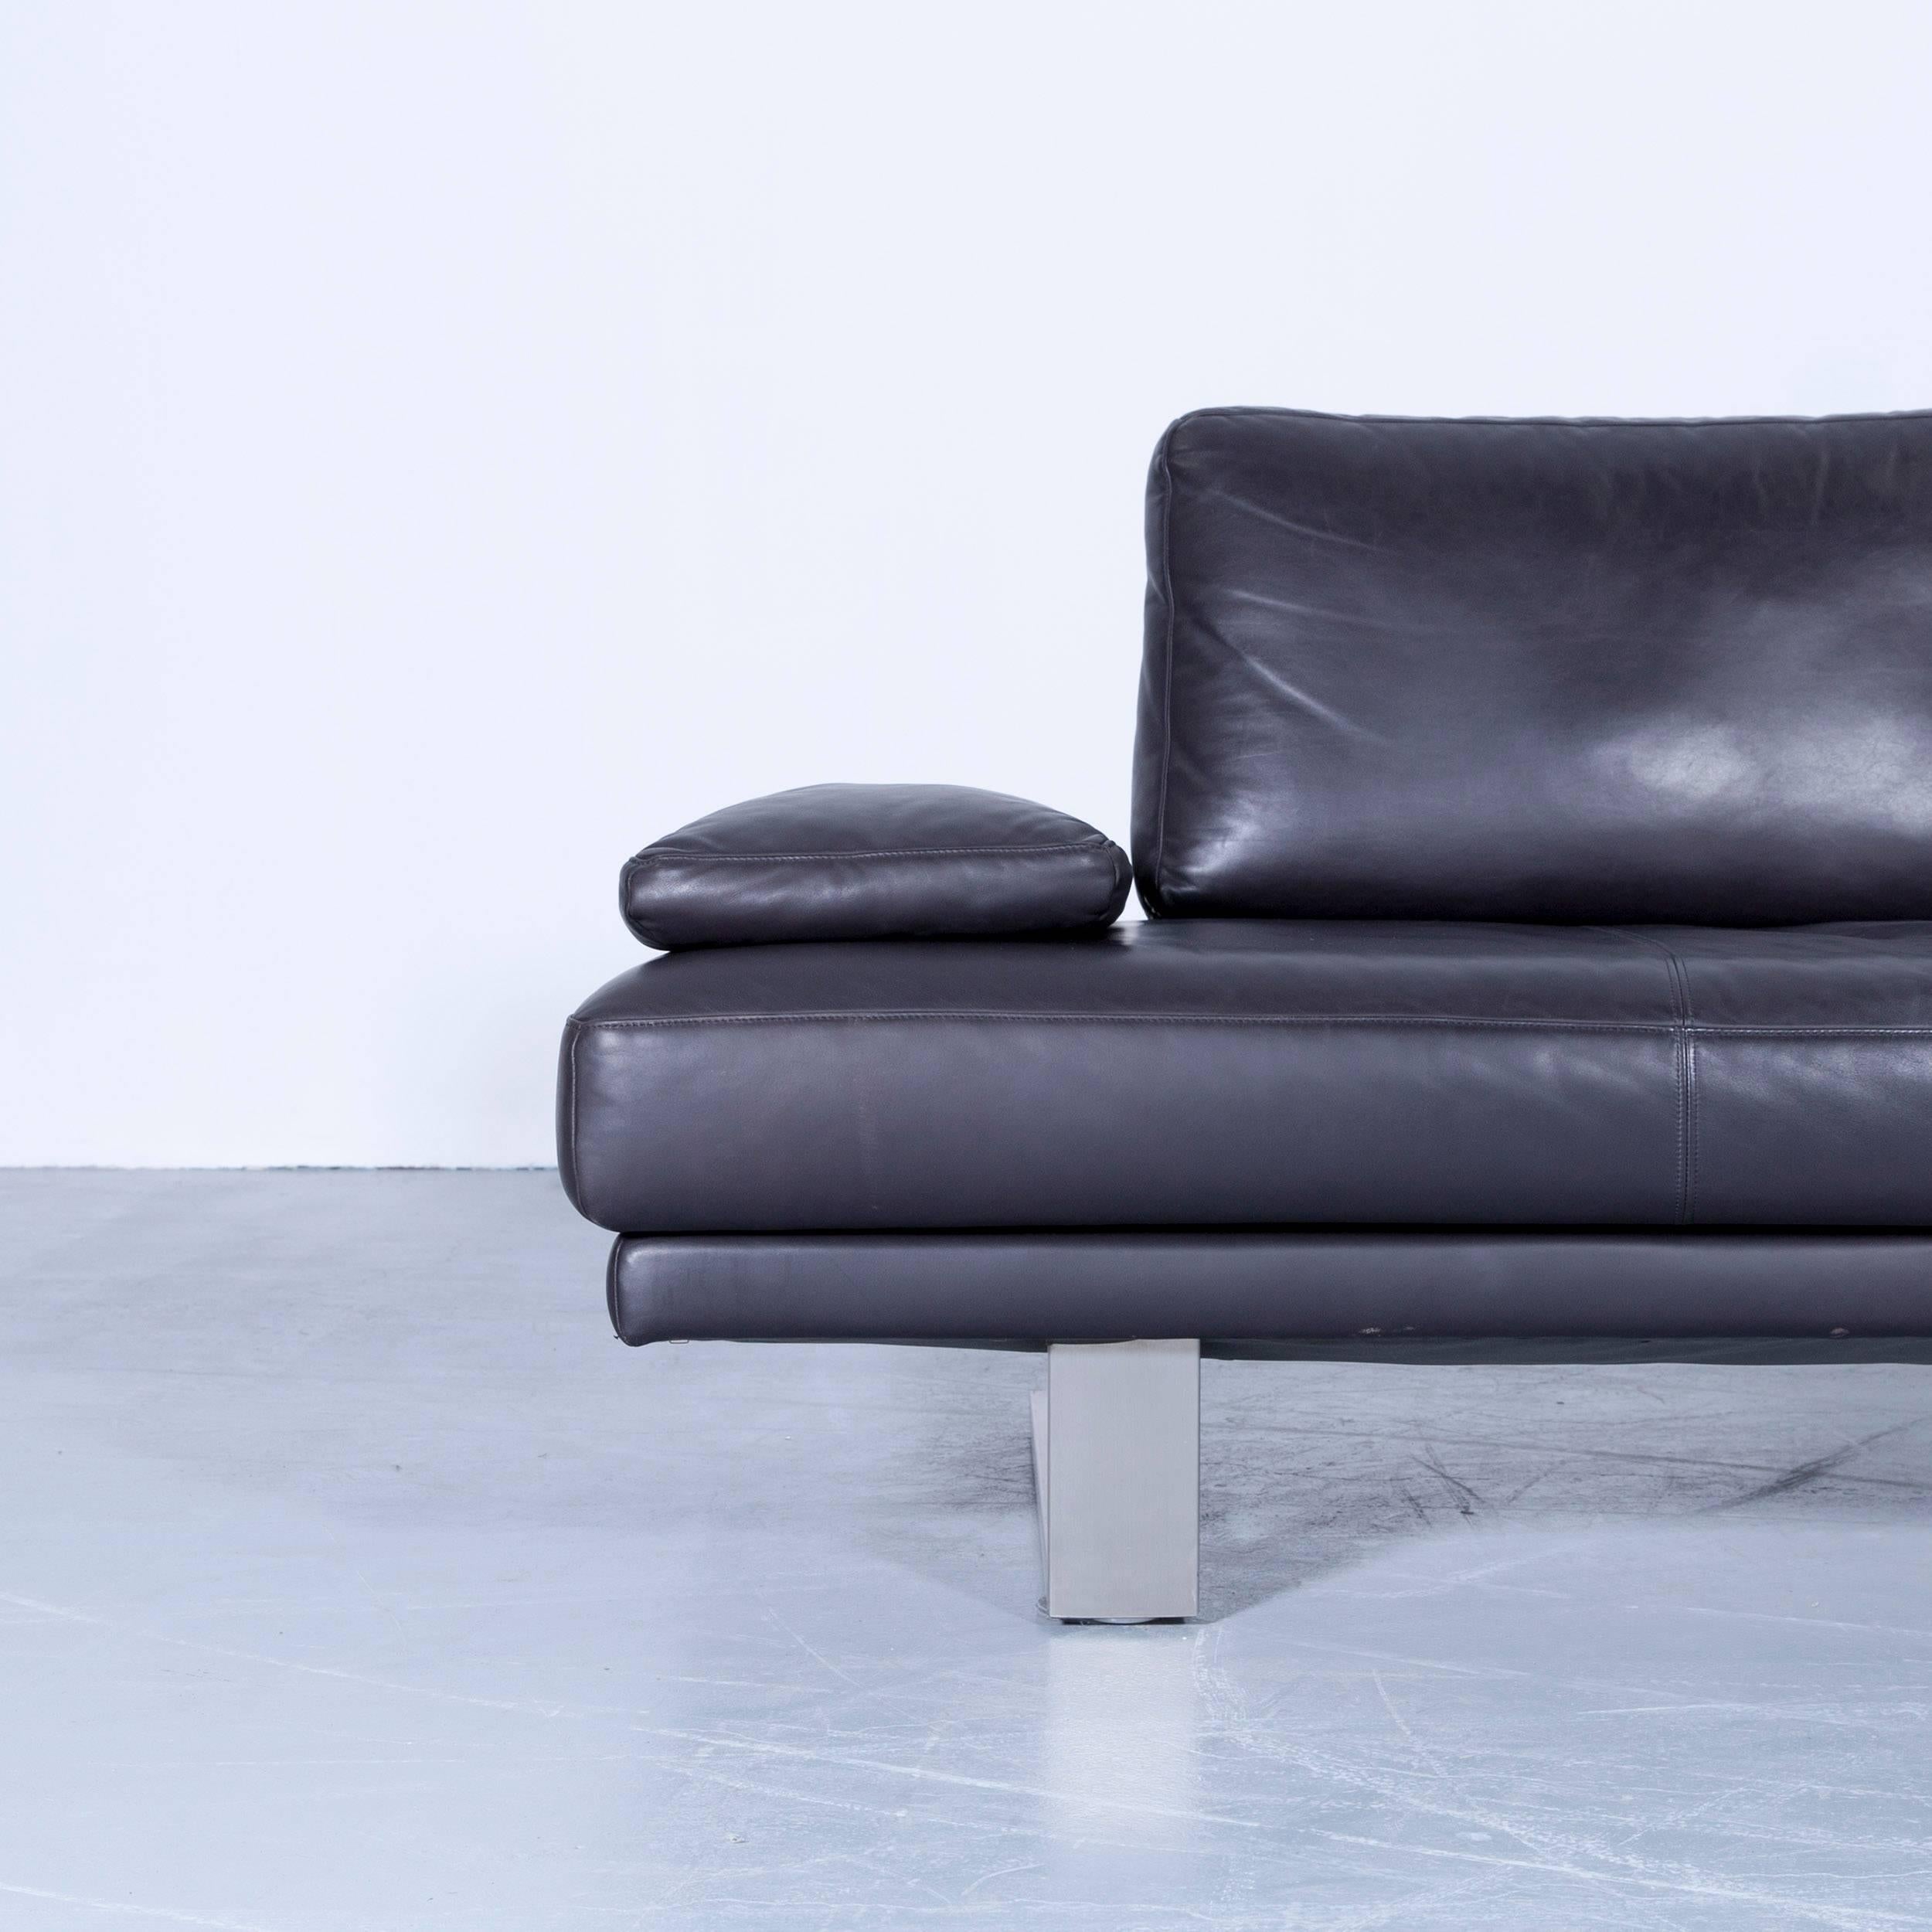 Aubergine black colored original Rolf Benz 6600, in a minimalistic and modern design, made for pure comfort and style.